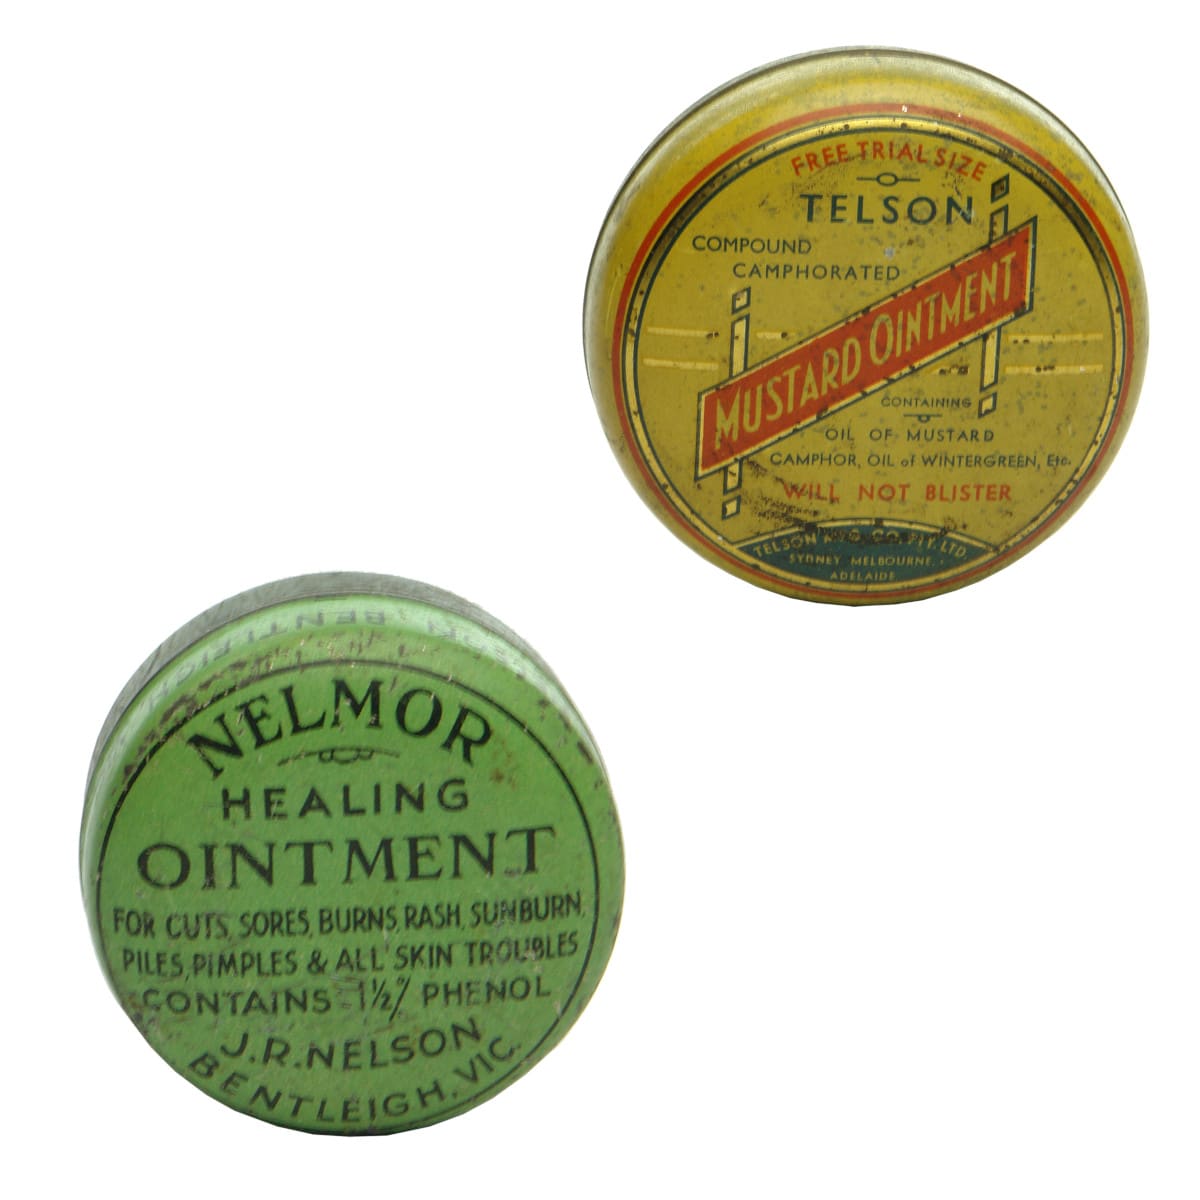 Pair of Ointment Tins: Telson Mustard Ointment & Nelmor Healing Ointment.